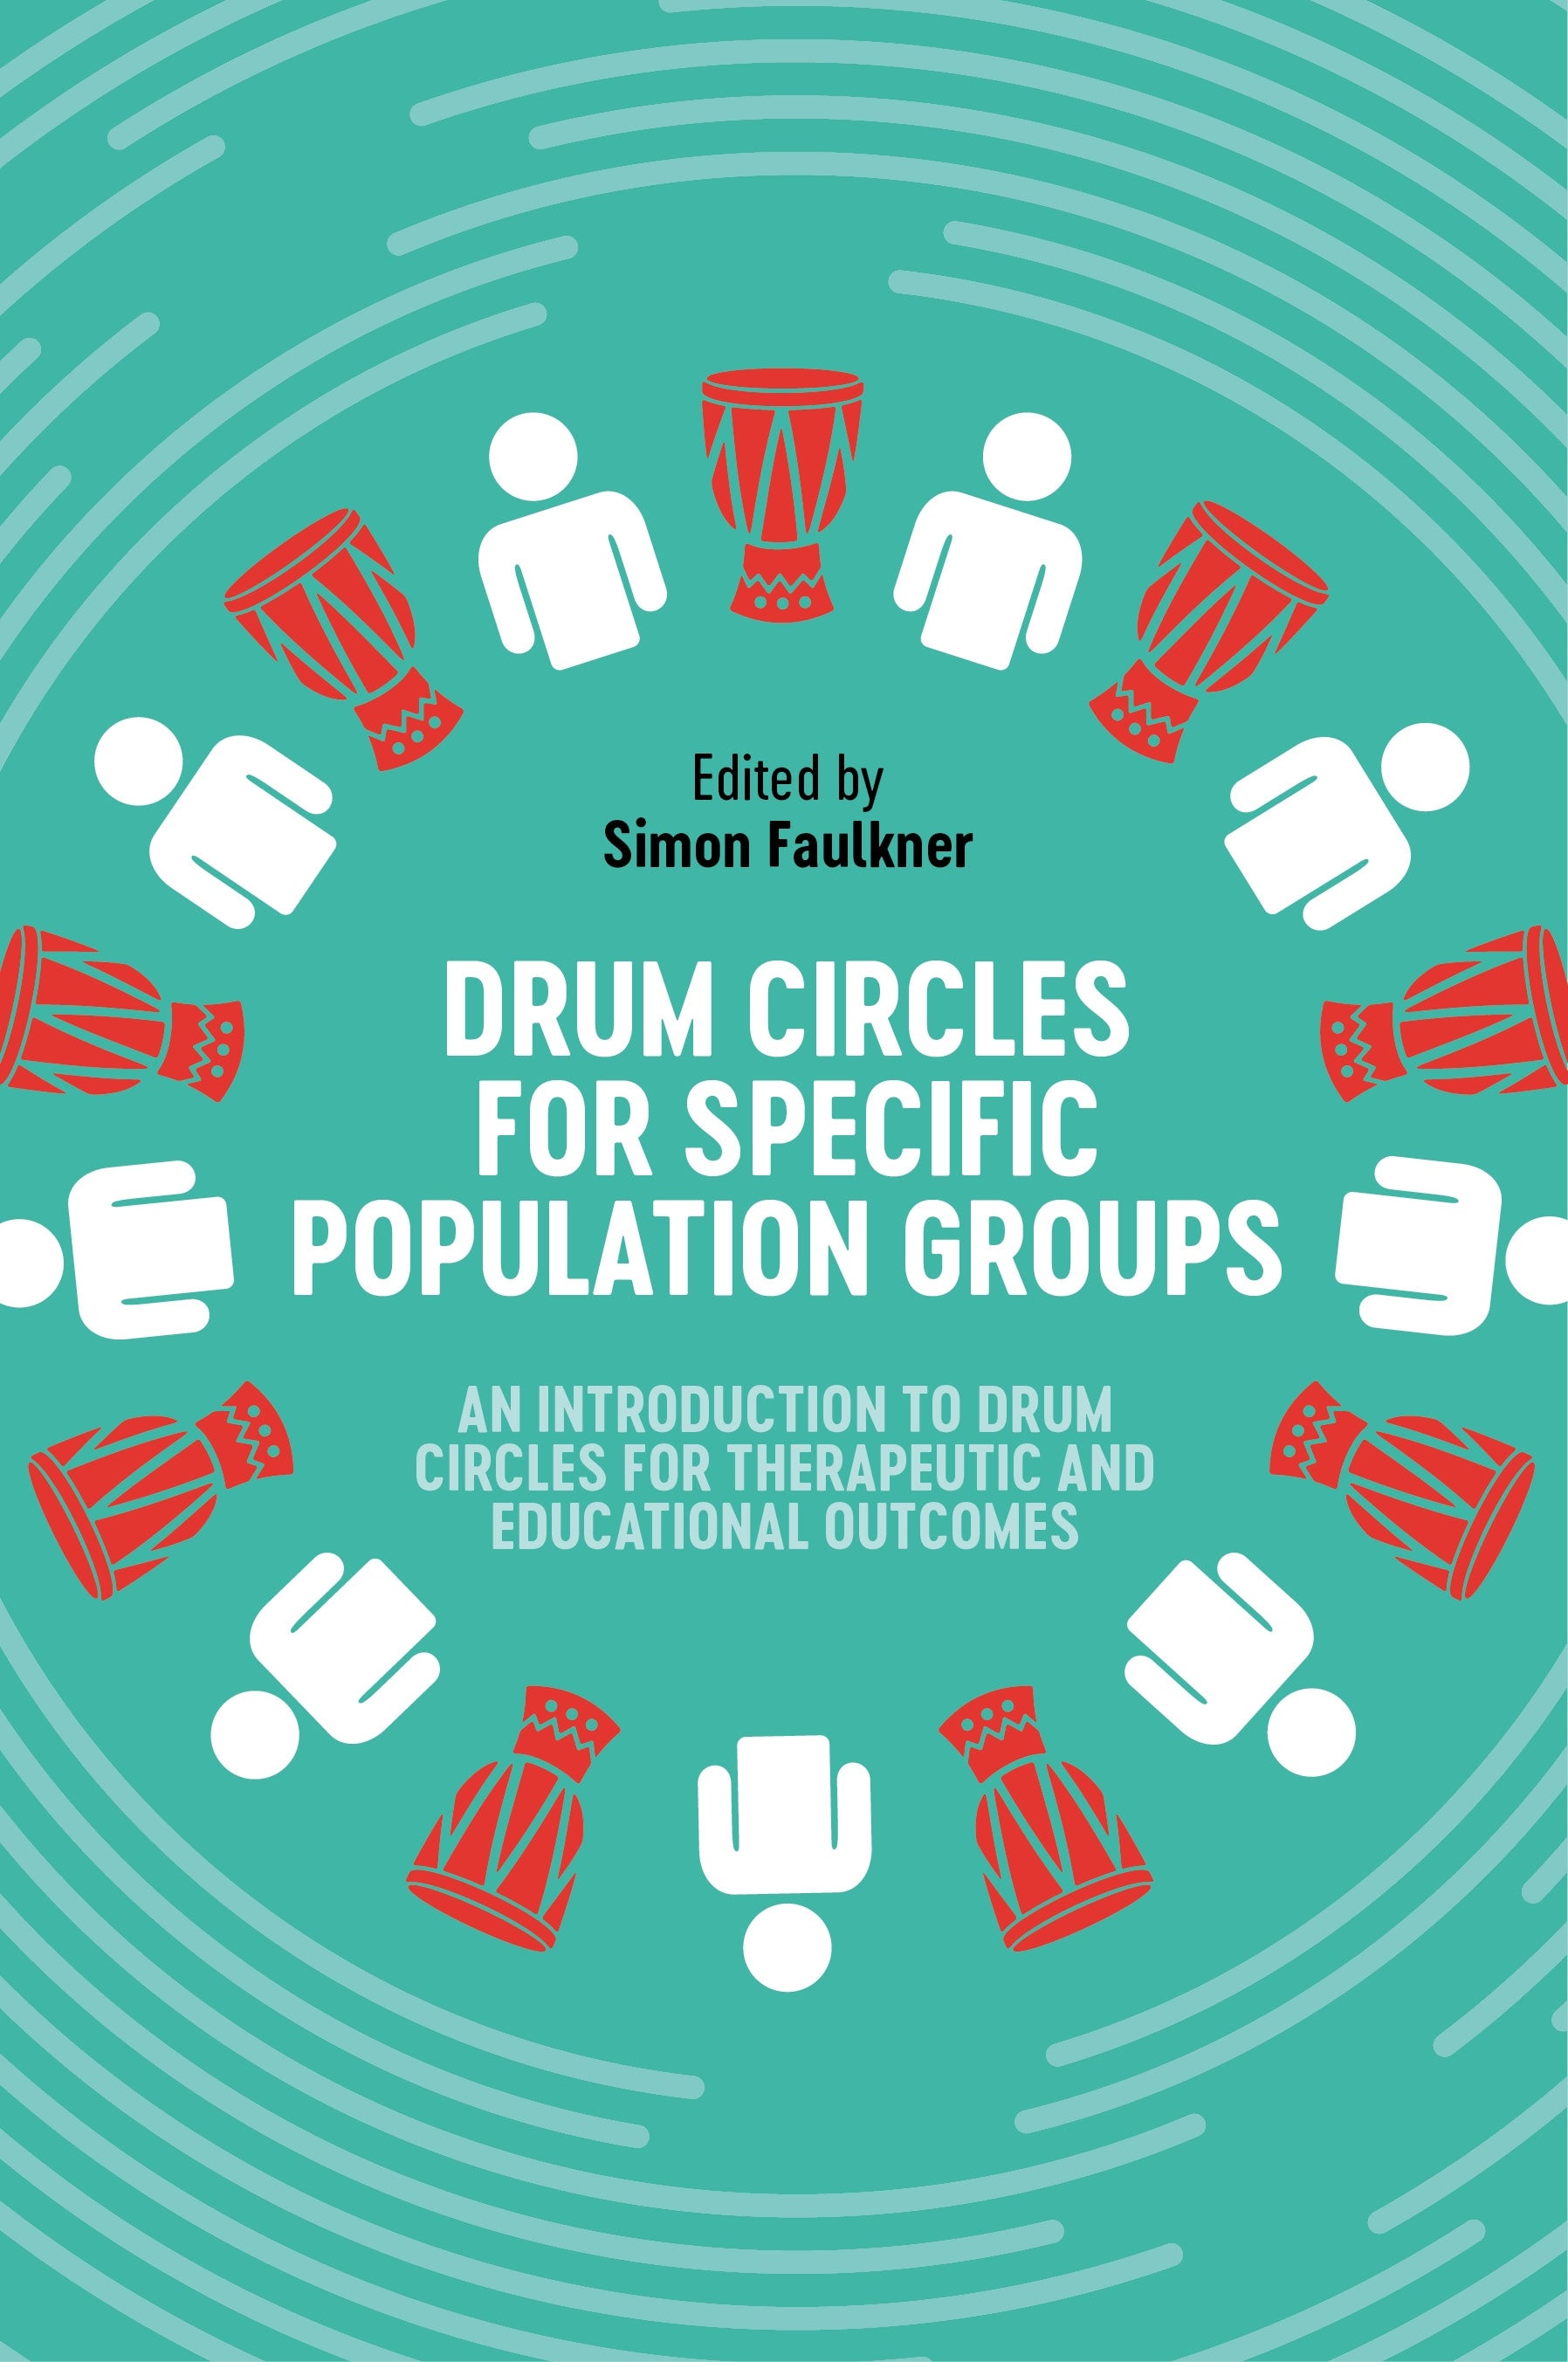 Drum Circles for Specific Population Groups by Simon Faulkner